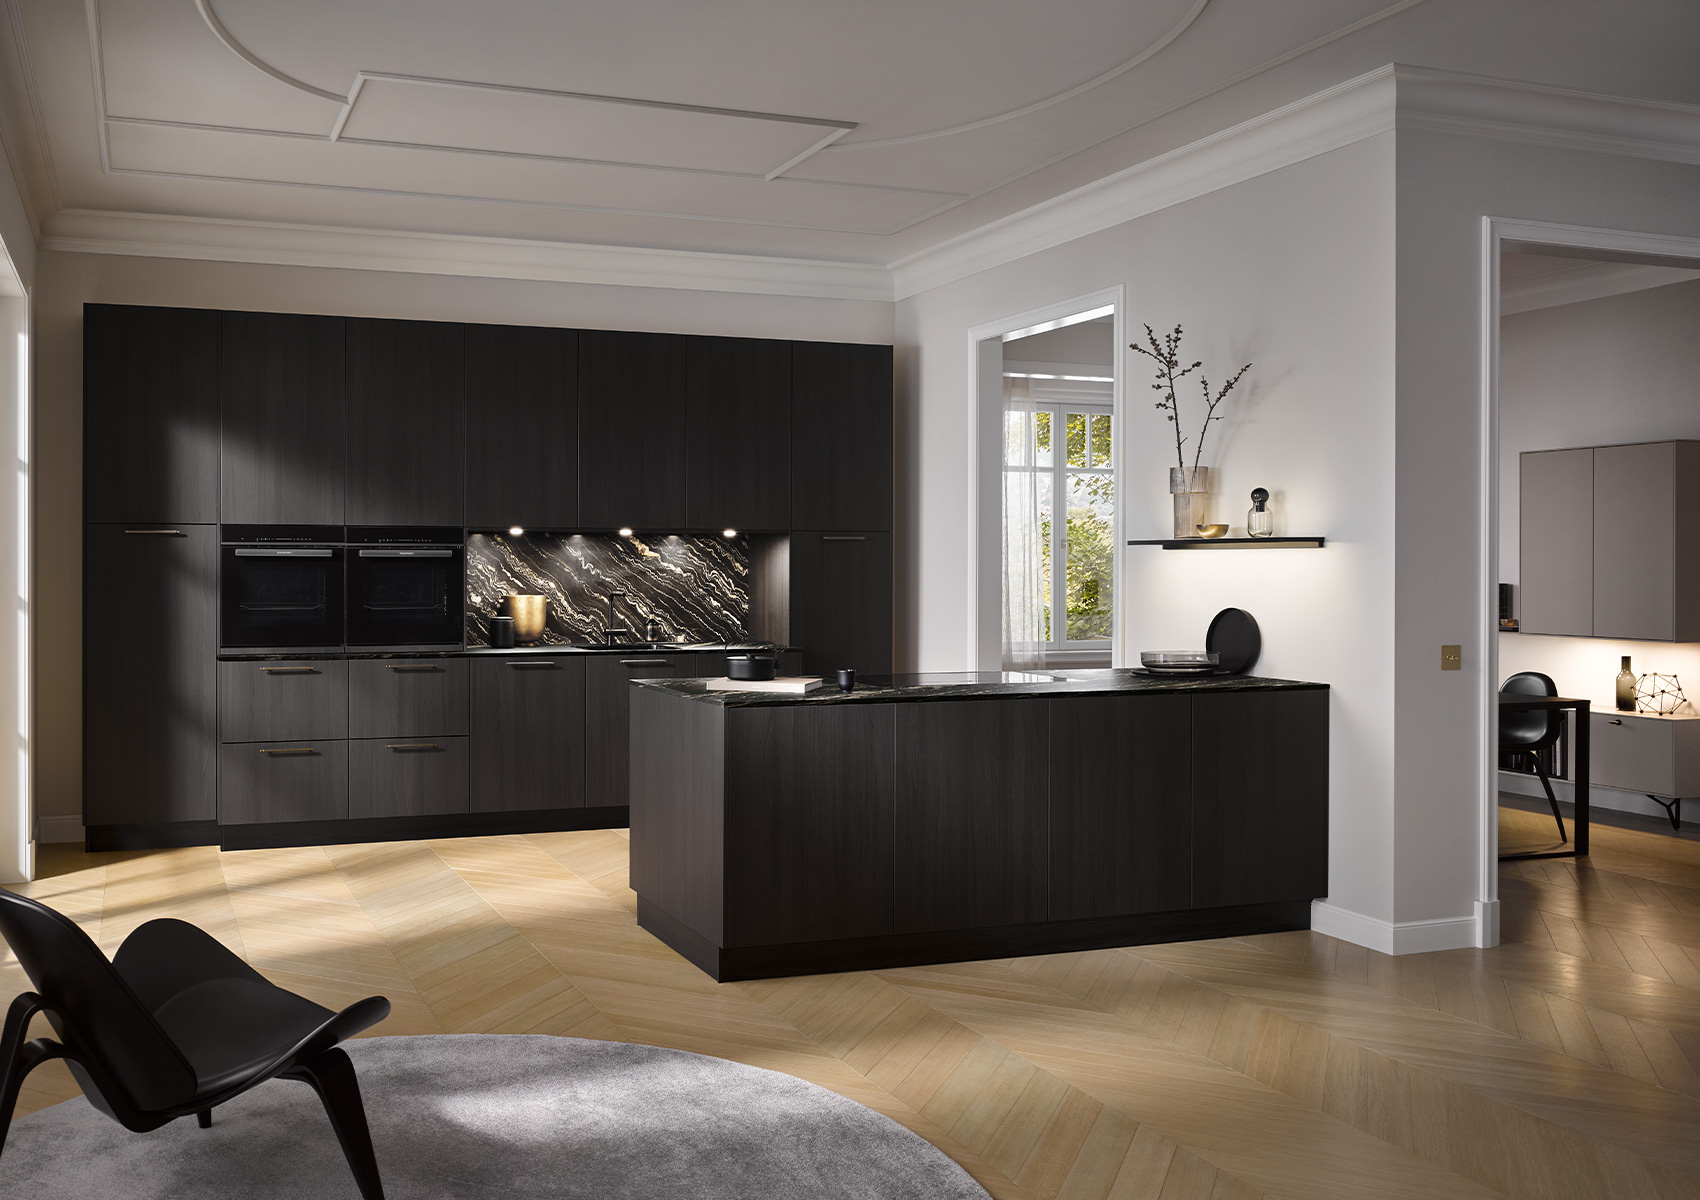 Image of a black kitchen AV 2040 Fine Black Oak with kitchen island, with dining area in the background